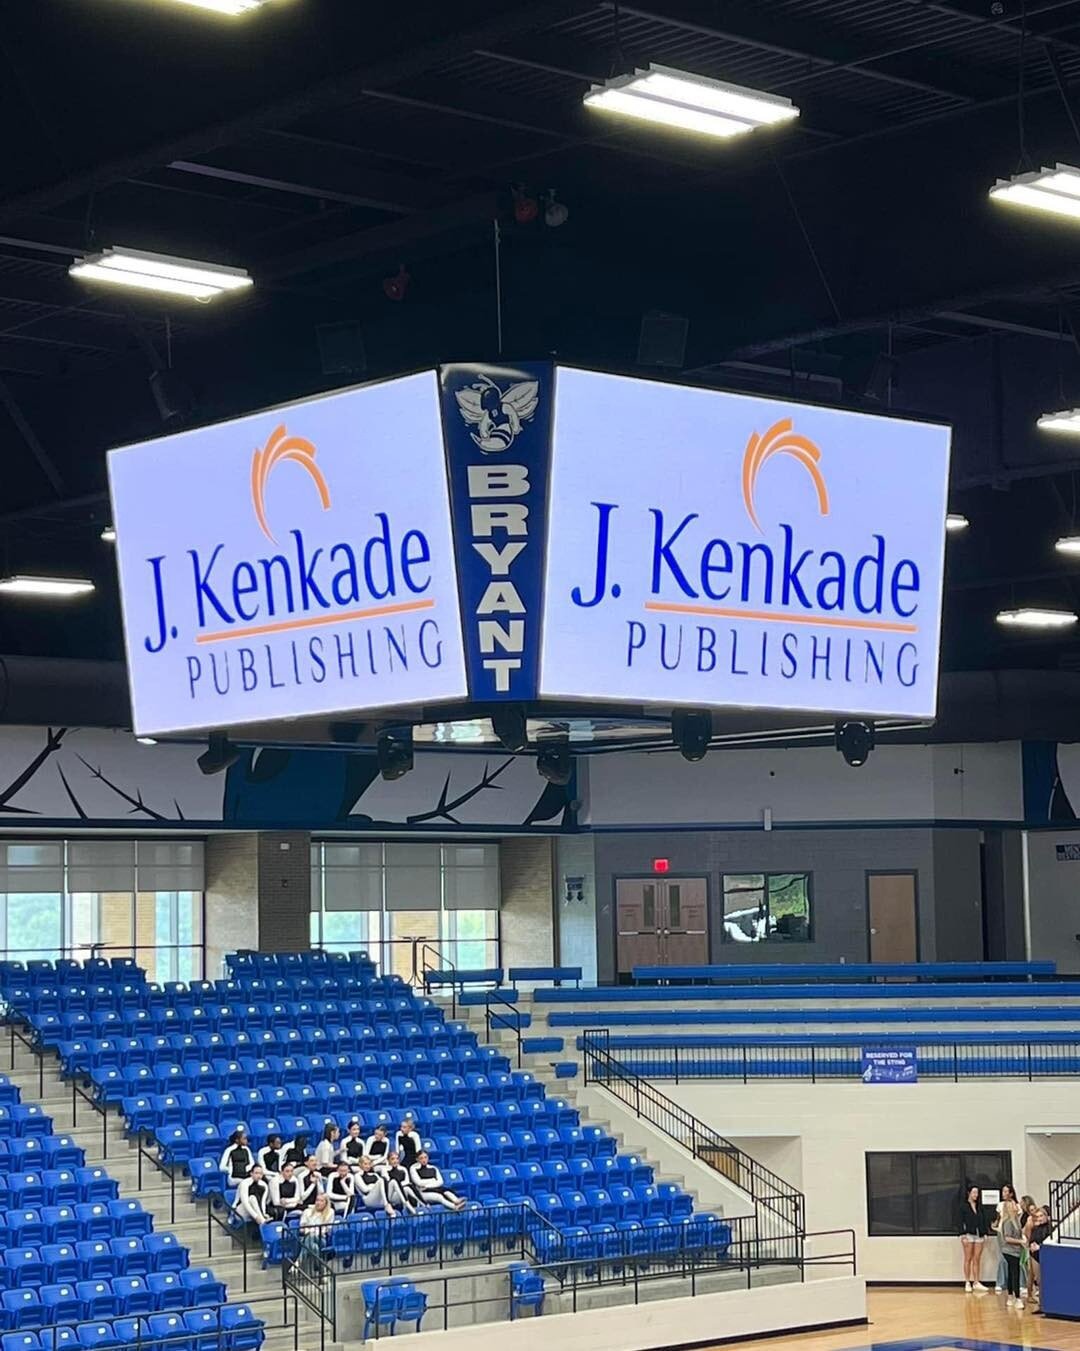 Thanks Bryant Public Schools! 💙

Ready to write your story, but don&rsquo;t know where to start? Author classes start Saturday, November 5th. We will see you there! 👇jkenkadepublishing.com/register

Ready to get published?
Authors retain 100% royal